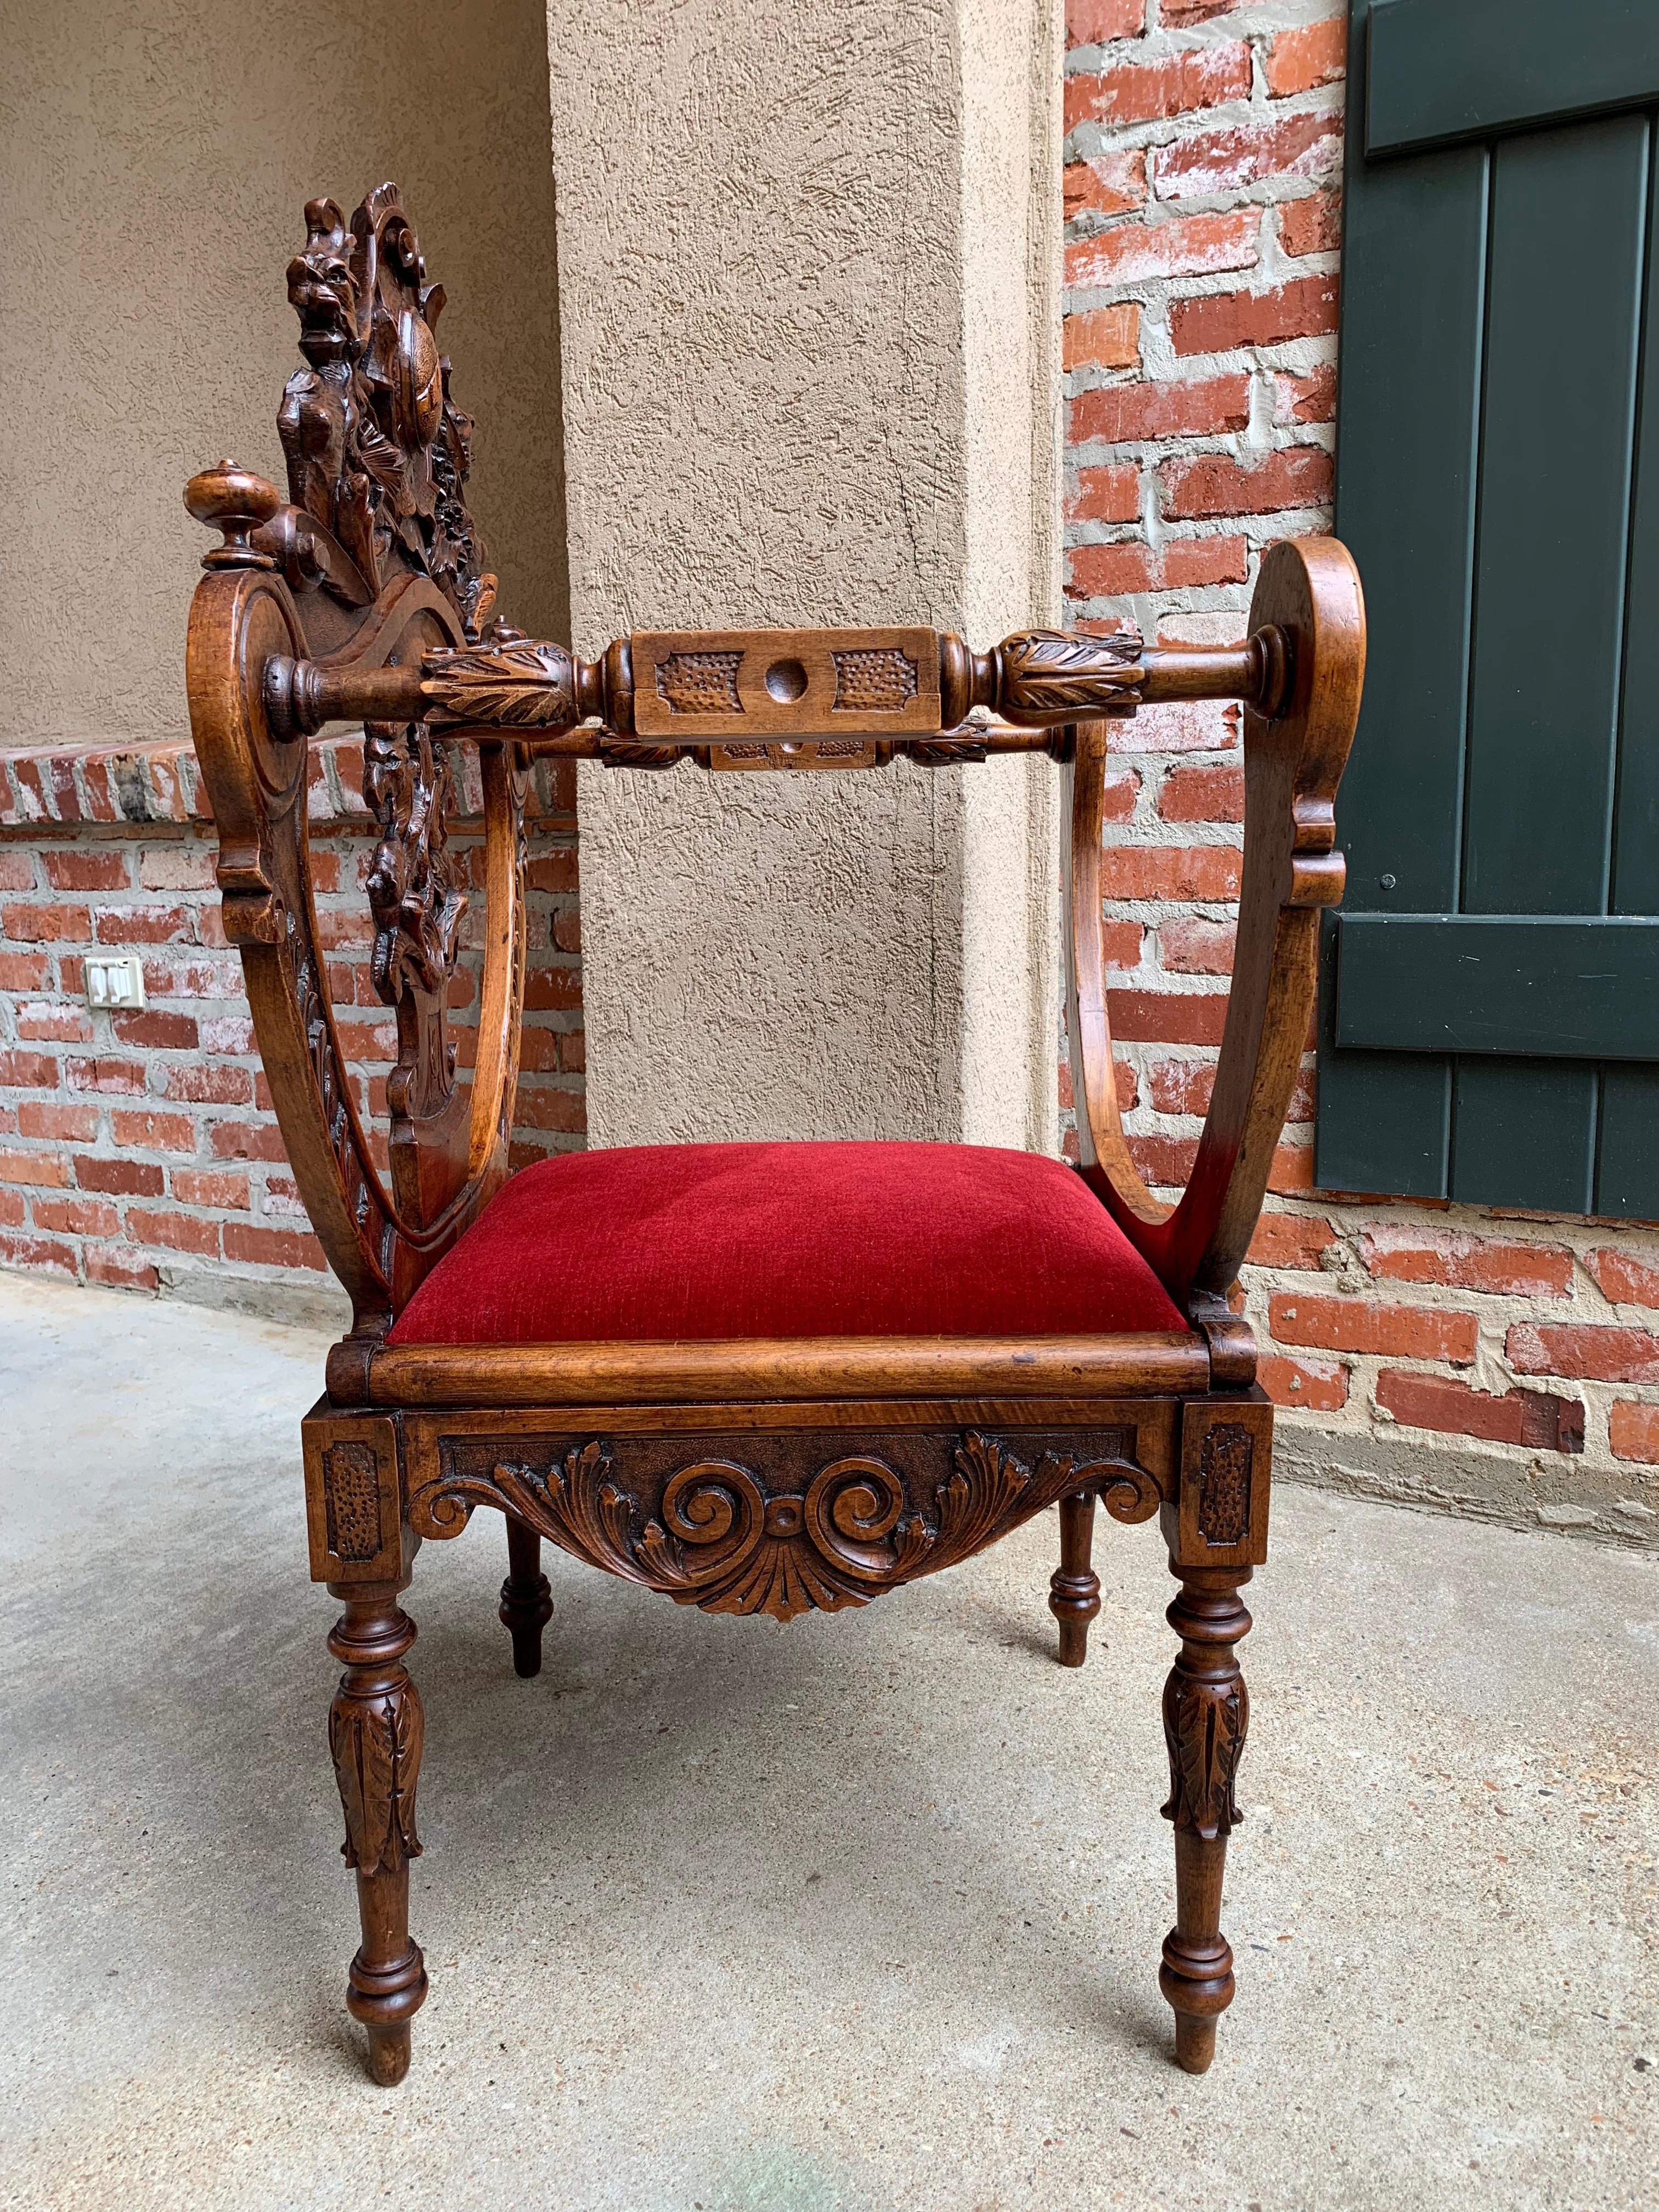 Direct from France, a stunning antique carved “Dagobert” chair with beautifully detailed antique hand carvings from top to bottom.~
~The dagobert throne chair or Curule chair has an amazing history, quite royal!!!~
~Center crown features an oval